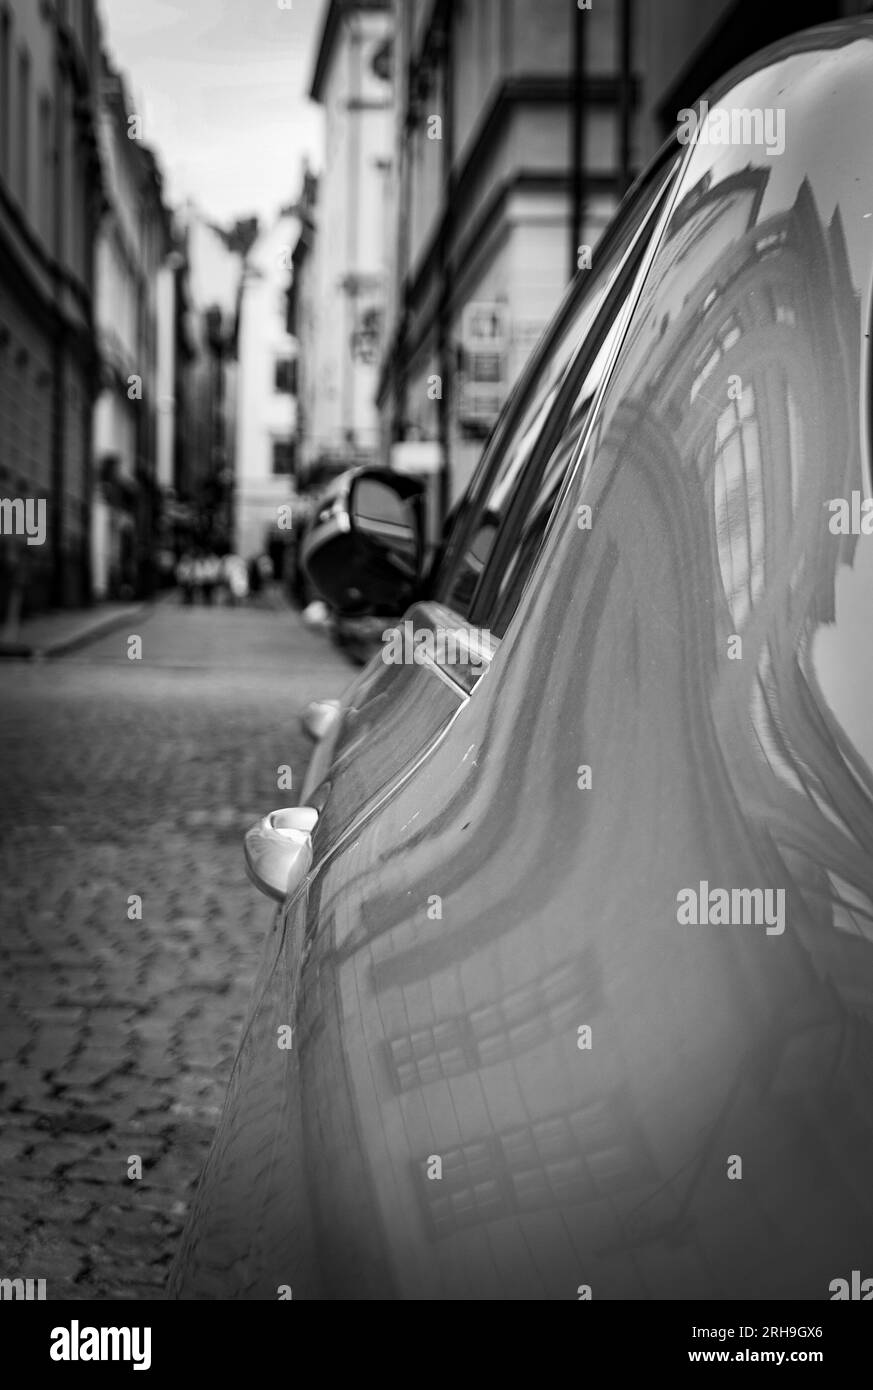 Close of a side of a car parked in the city Stock Photo